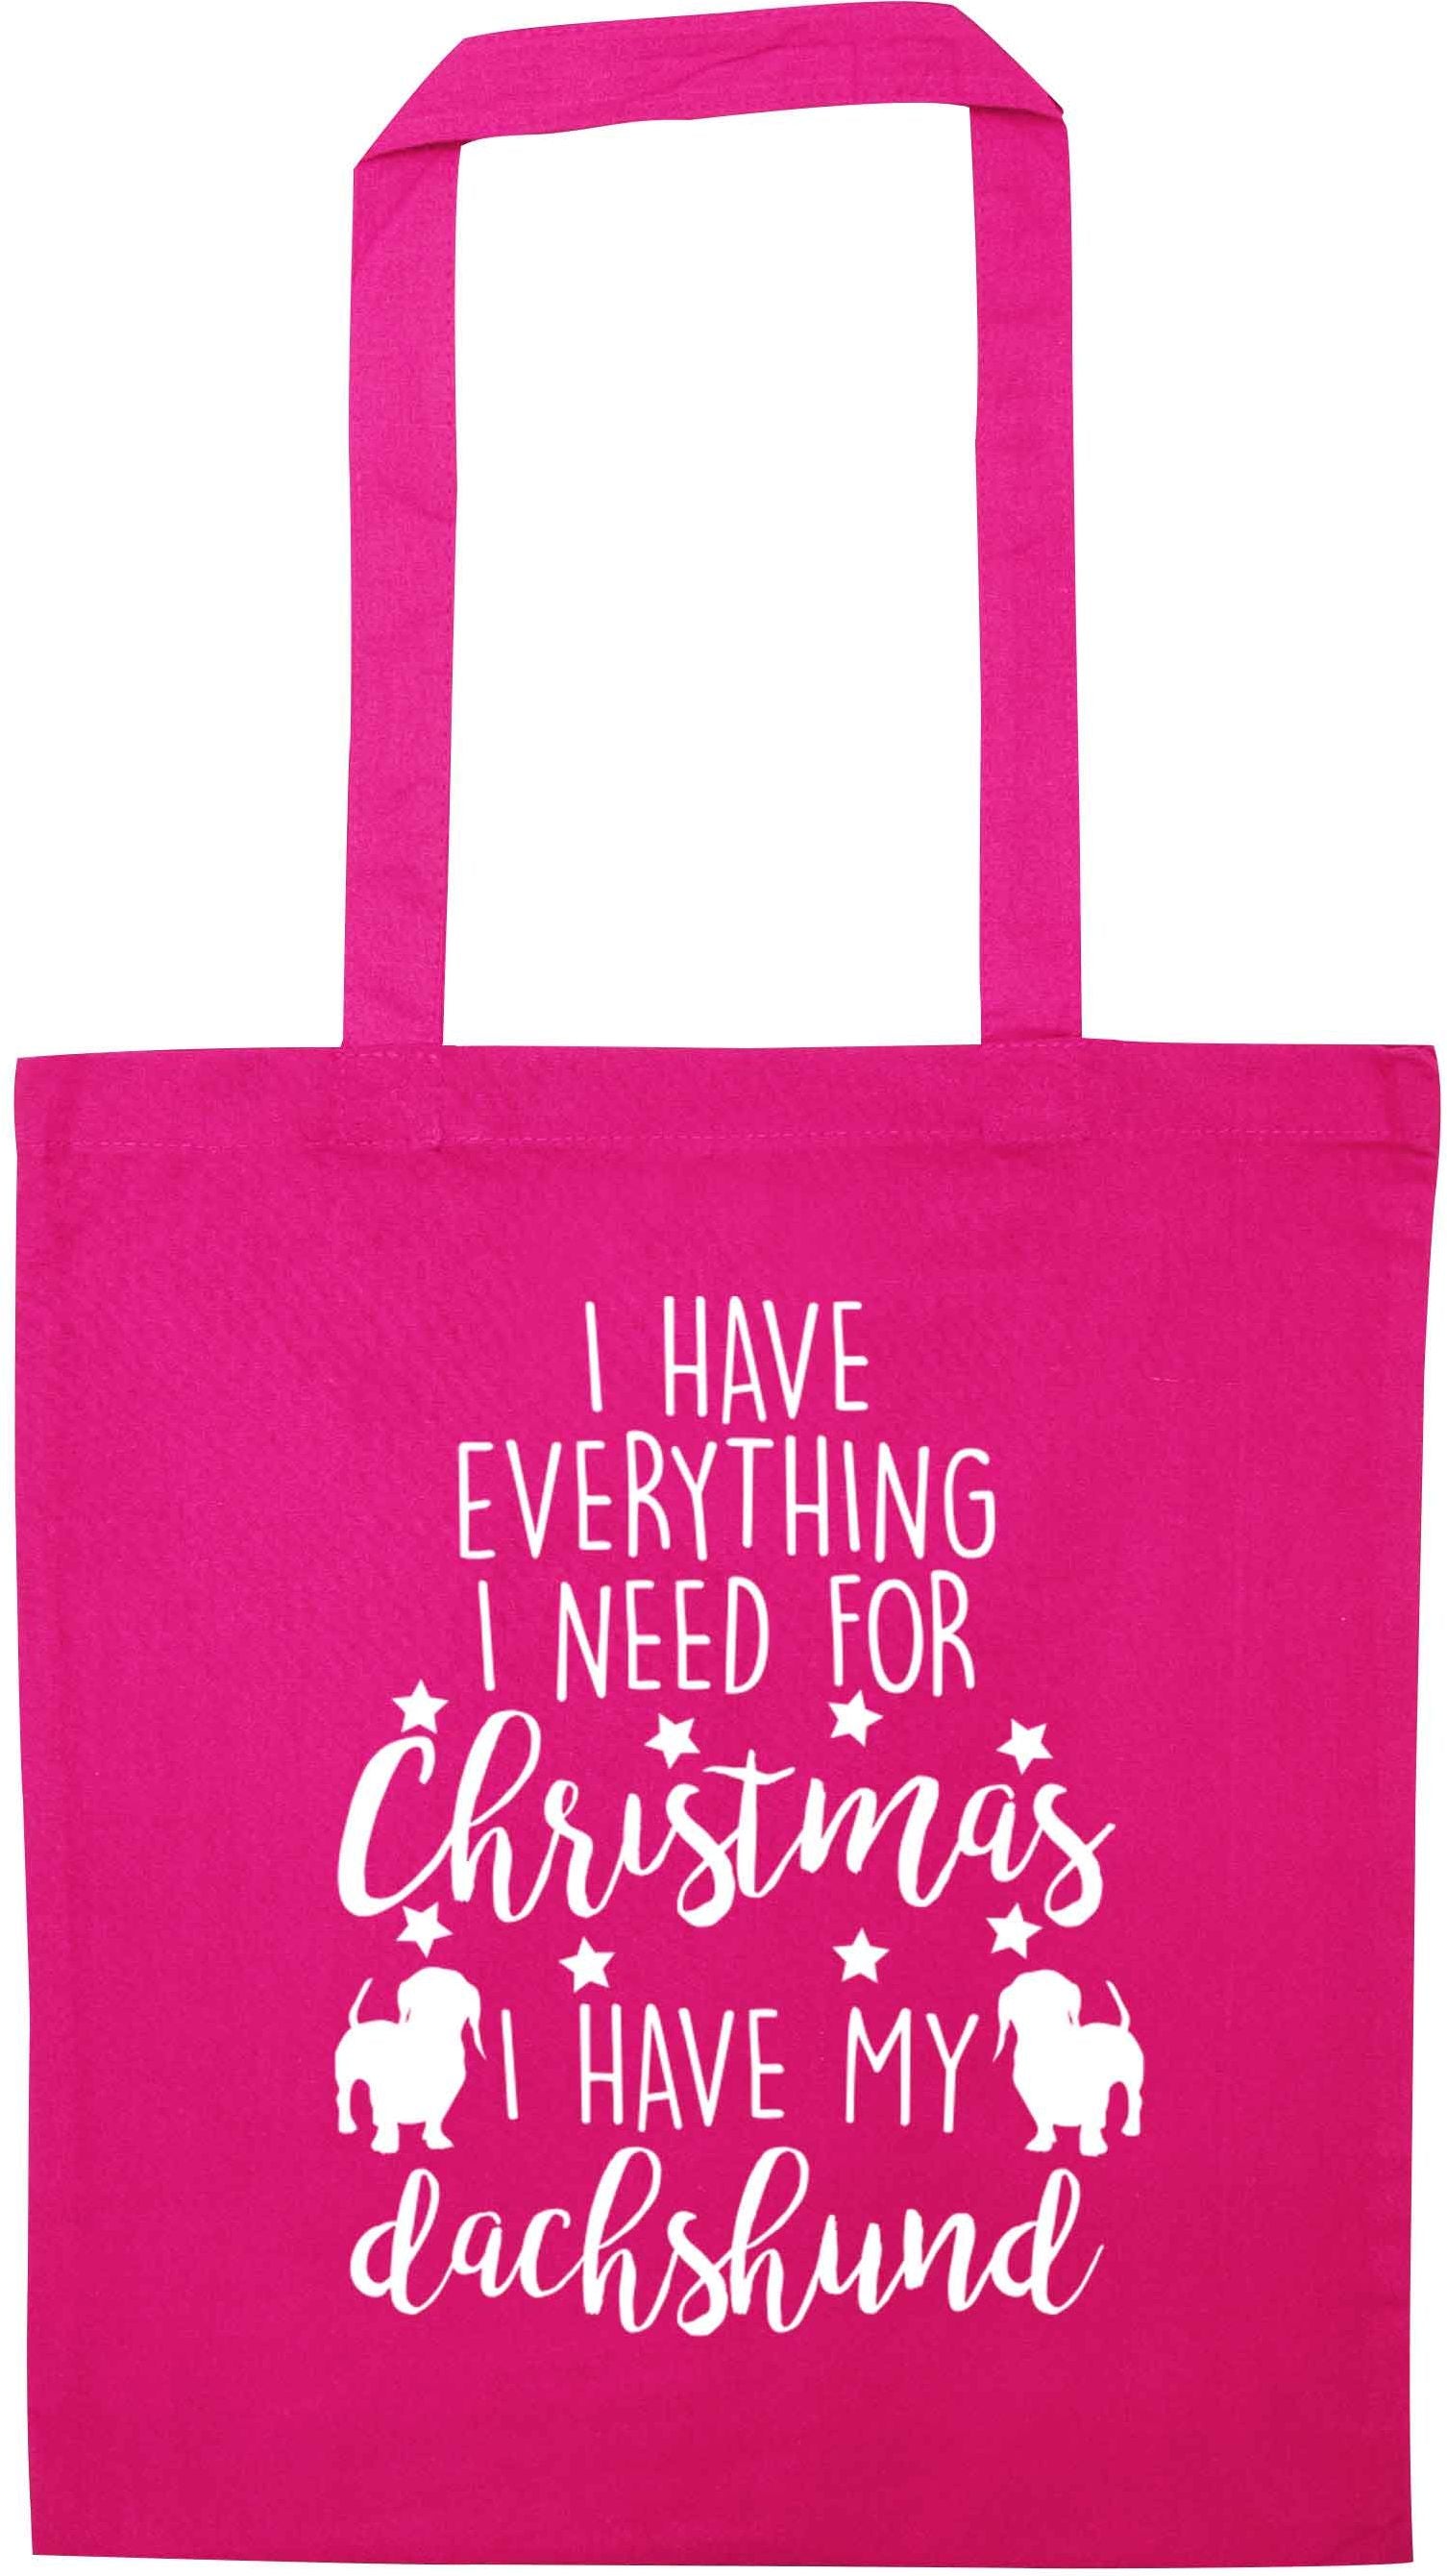 I have everything I need for Christmas I have my dachshund pink tote bag